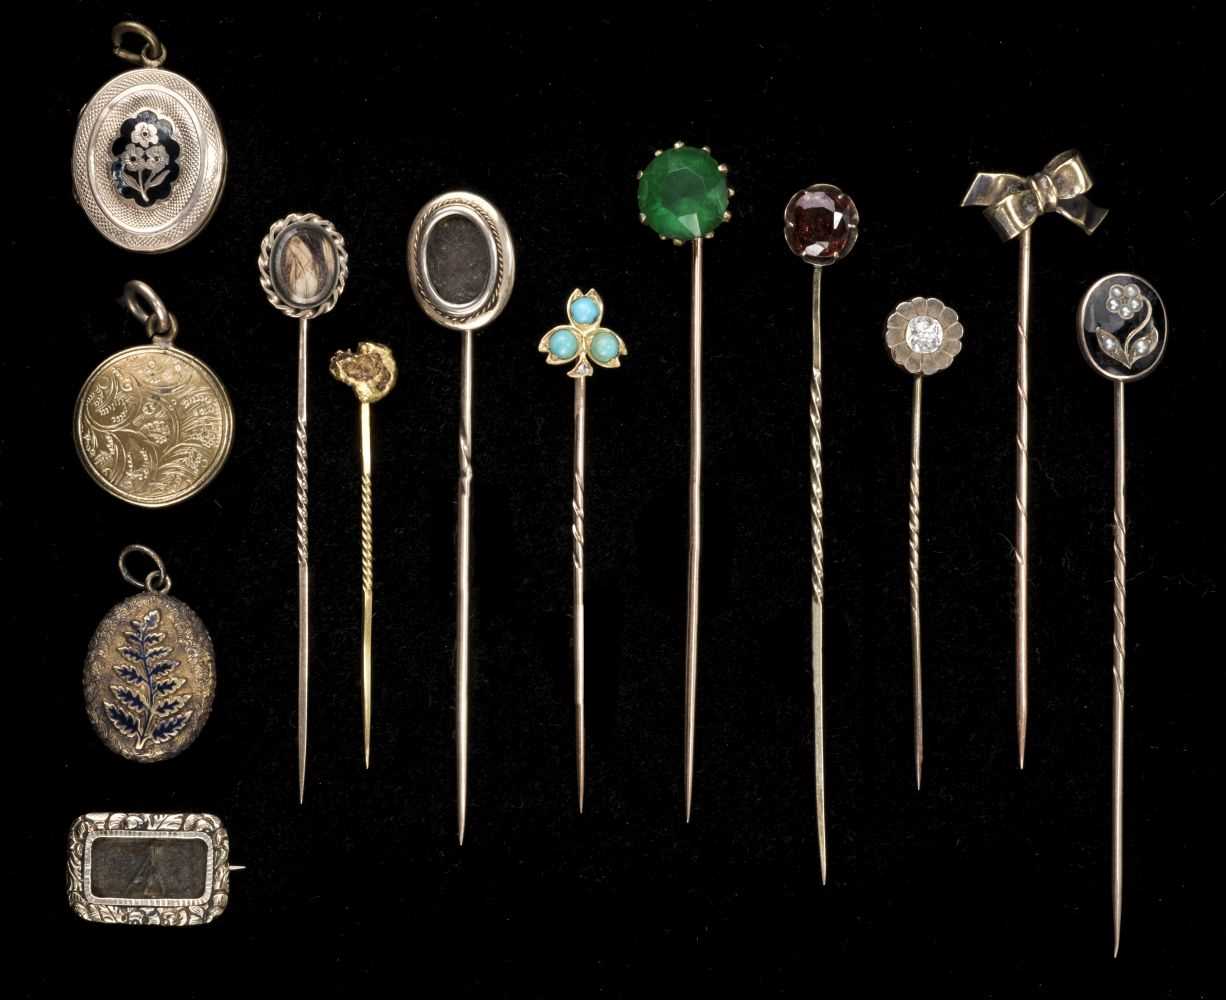 Lot 478 - Tie Pins. A collection of tie pins and mourning jewellery